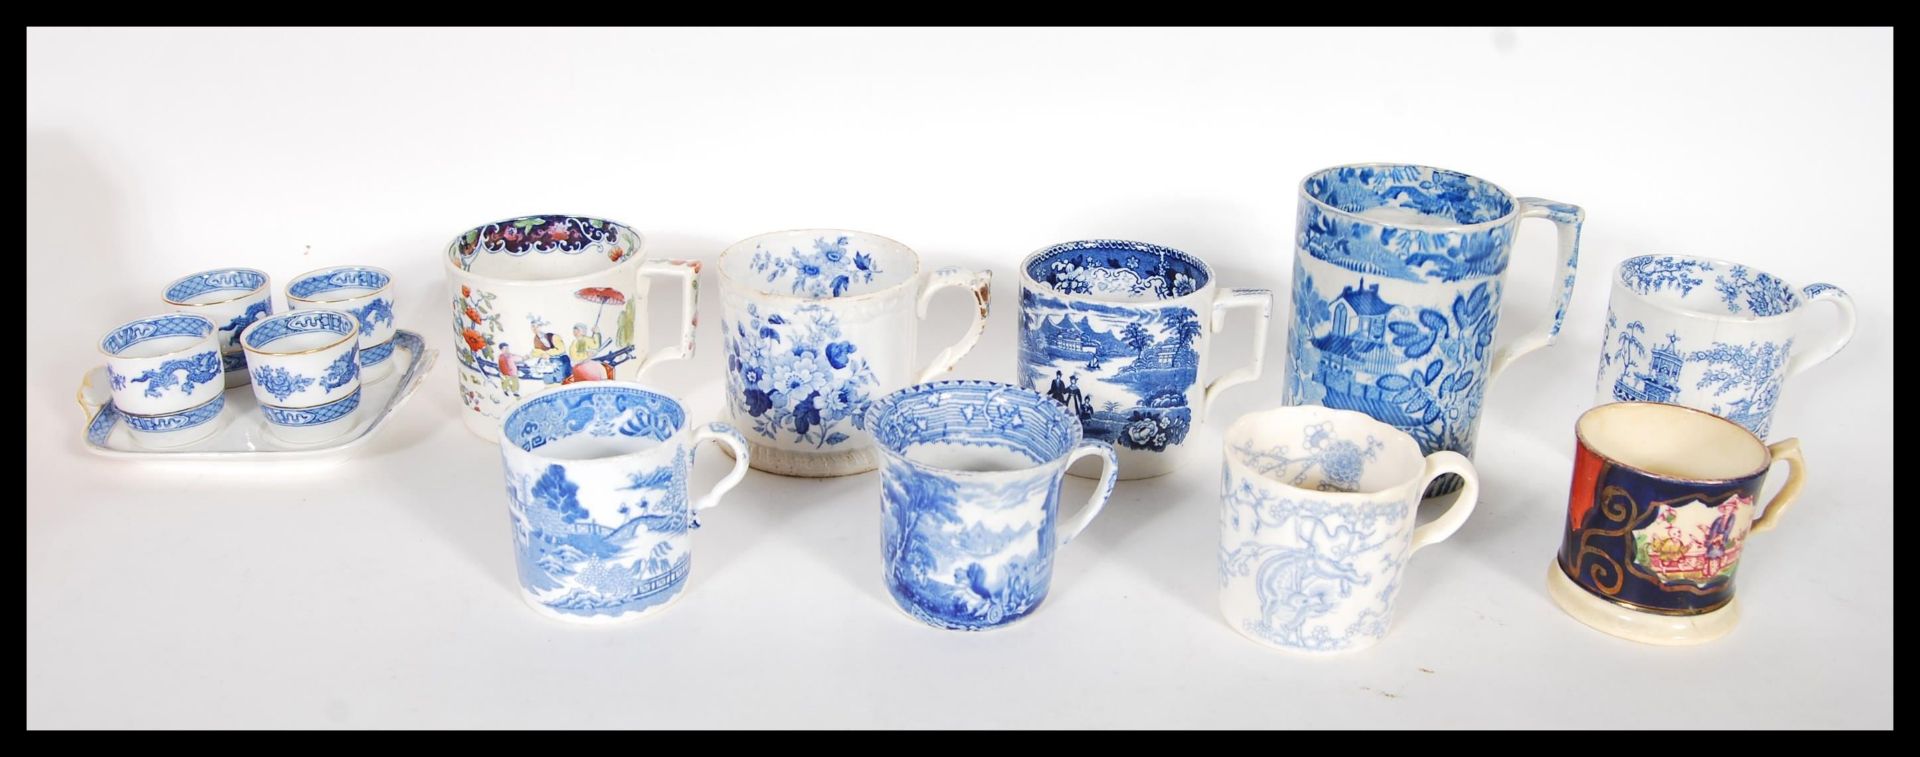 A collection of 19th Century Victorian Staffordshire mugs and cups, most having blue and white